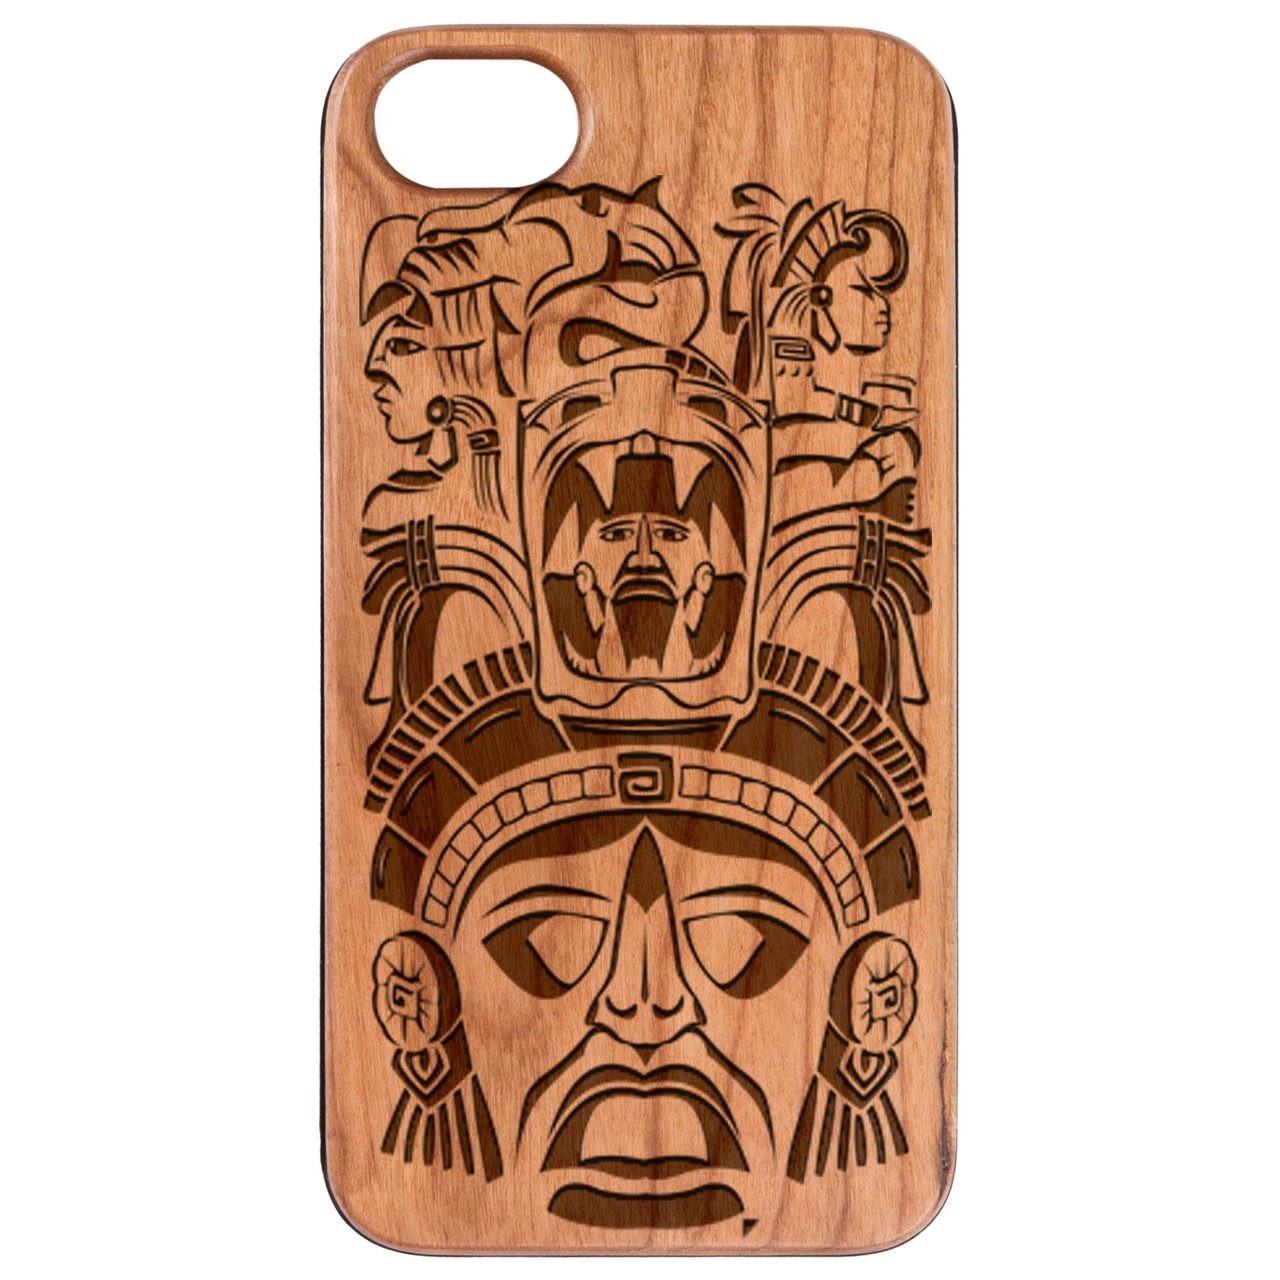  Mayan Mask - Engraved - Wooden Phone Case - IPhone 13 Models